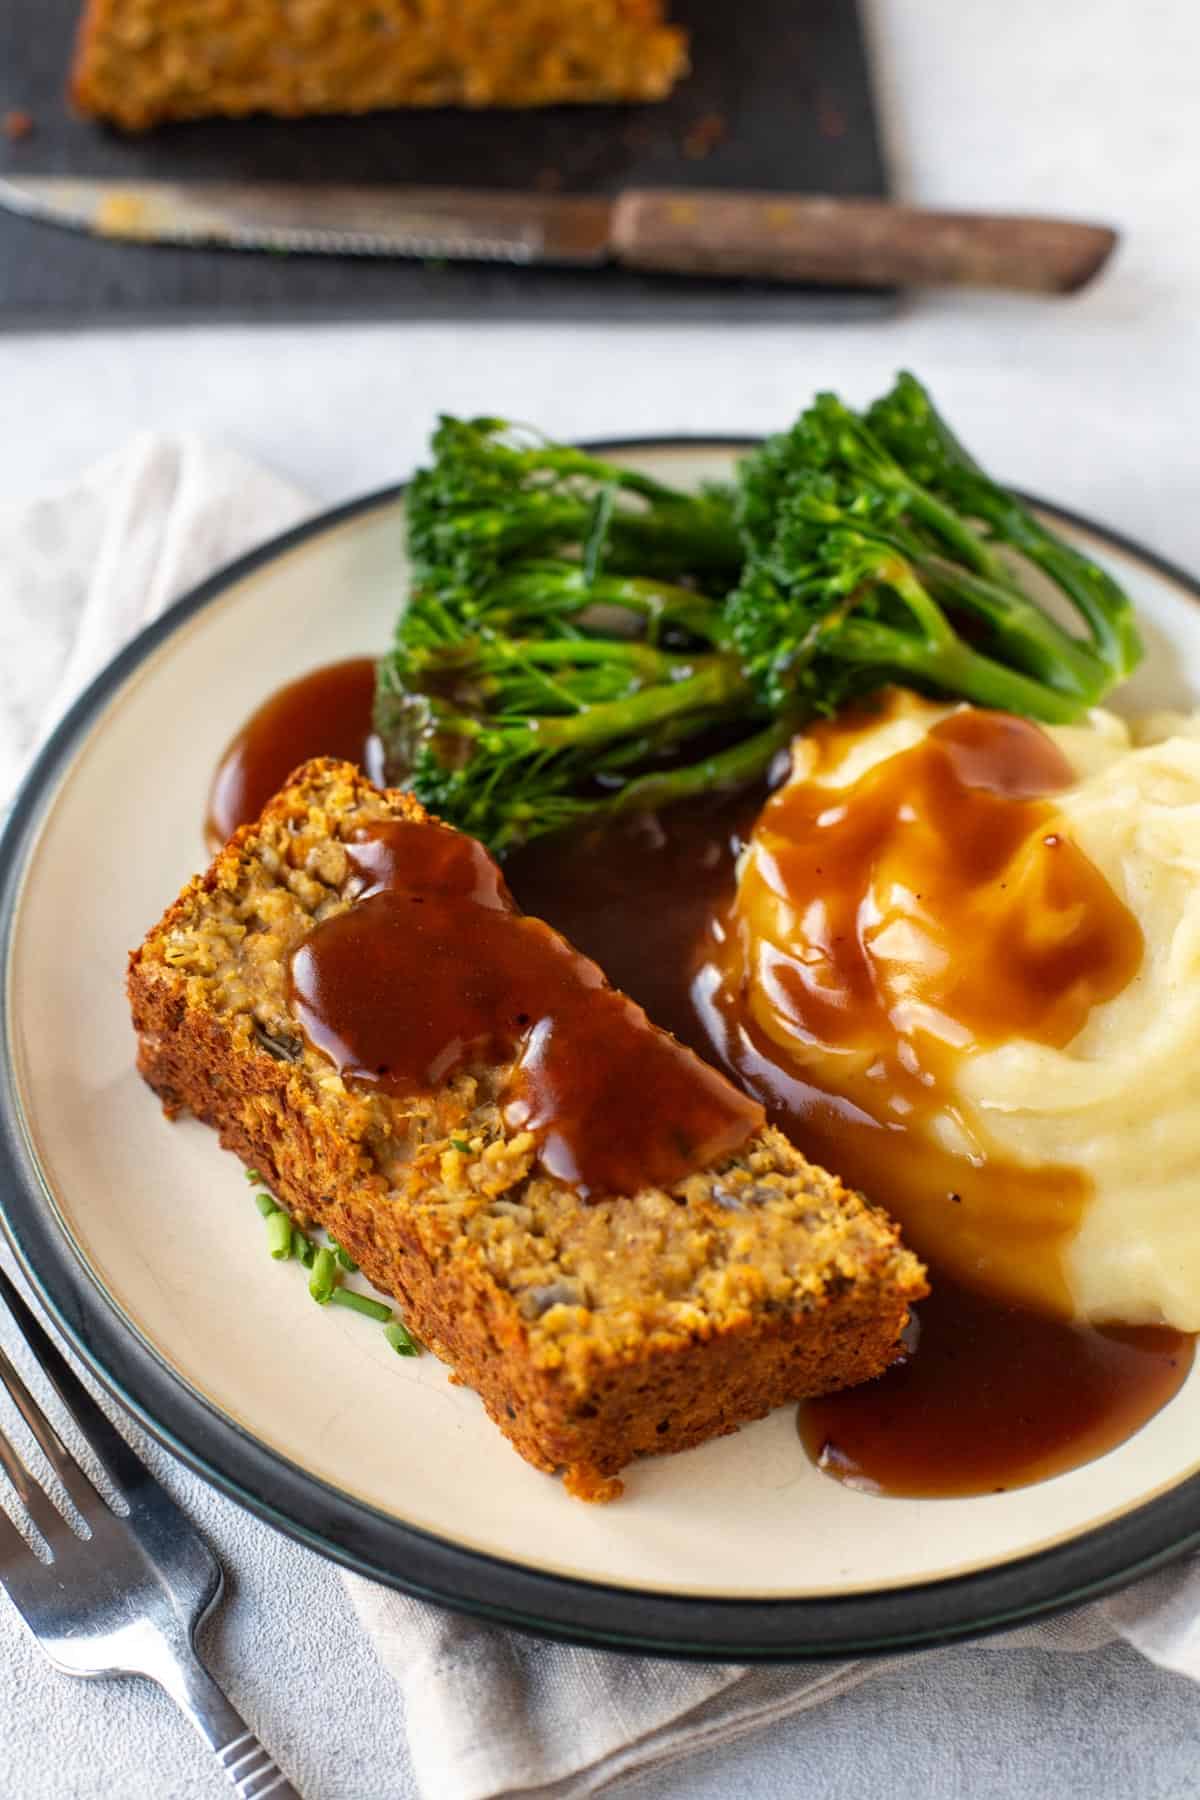 A slice of vegan lentil loaf on a plate with mashed potato, broccoli and gravy.